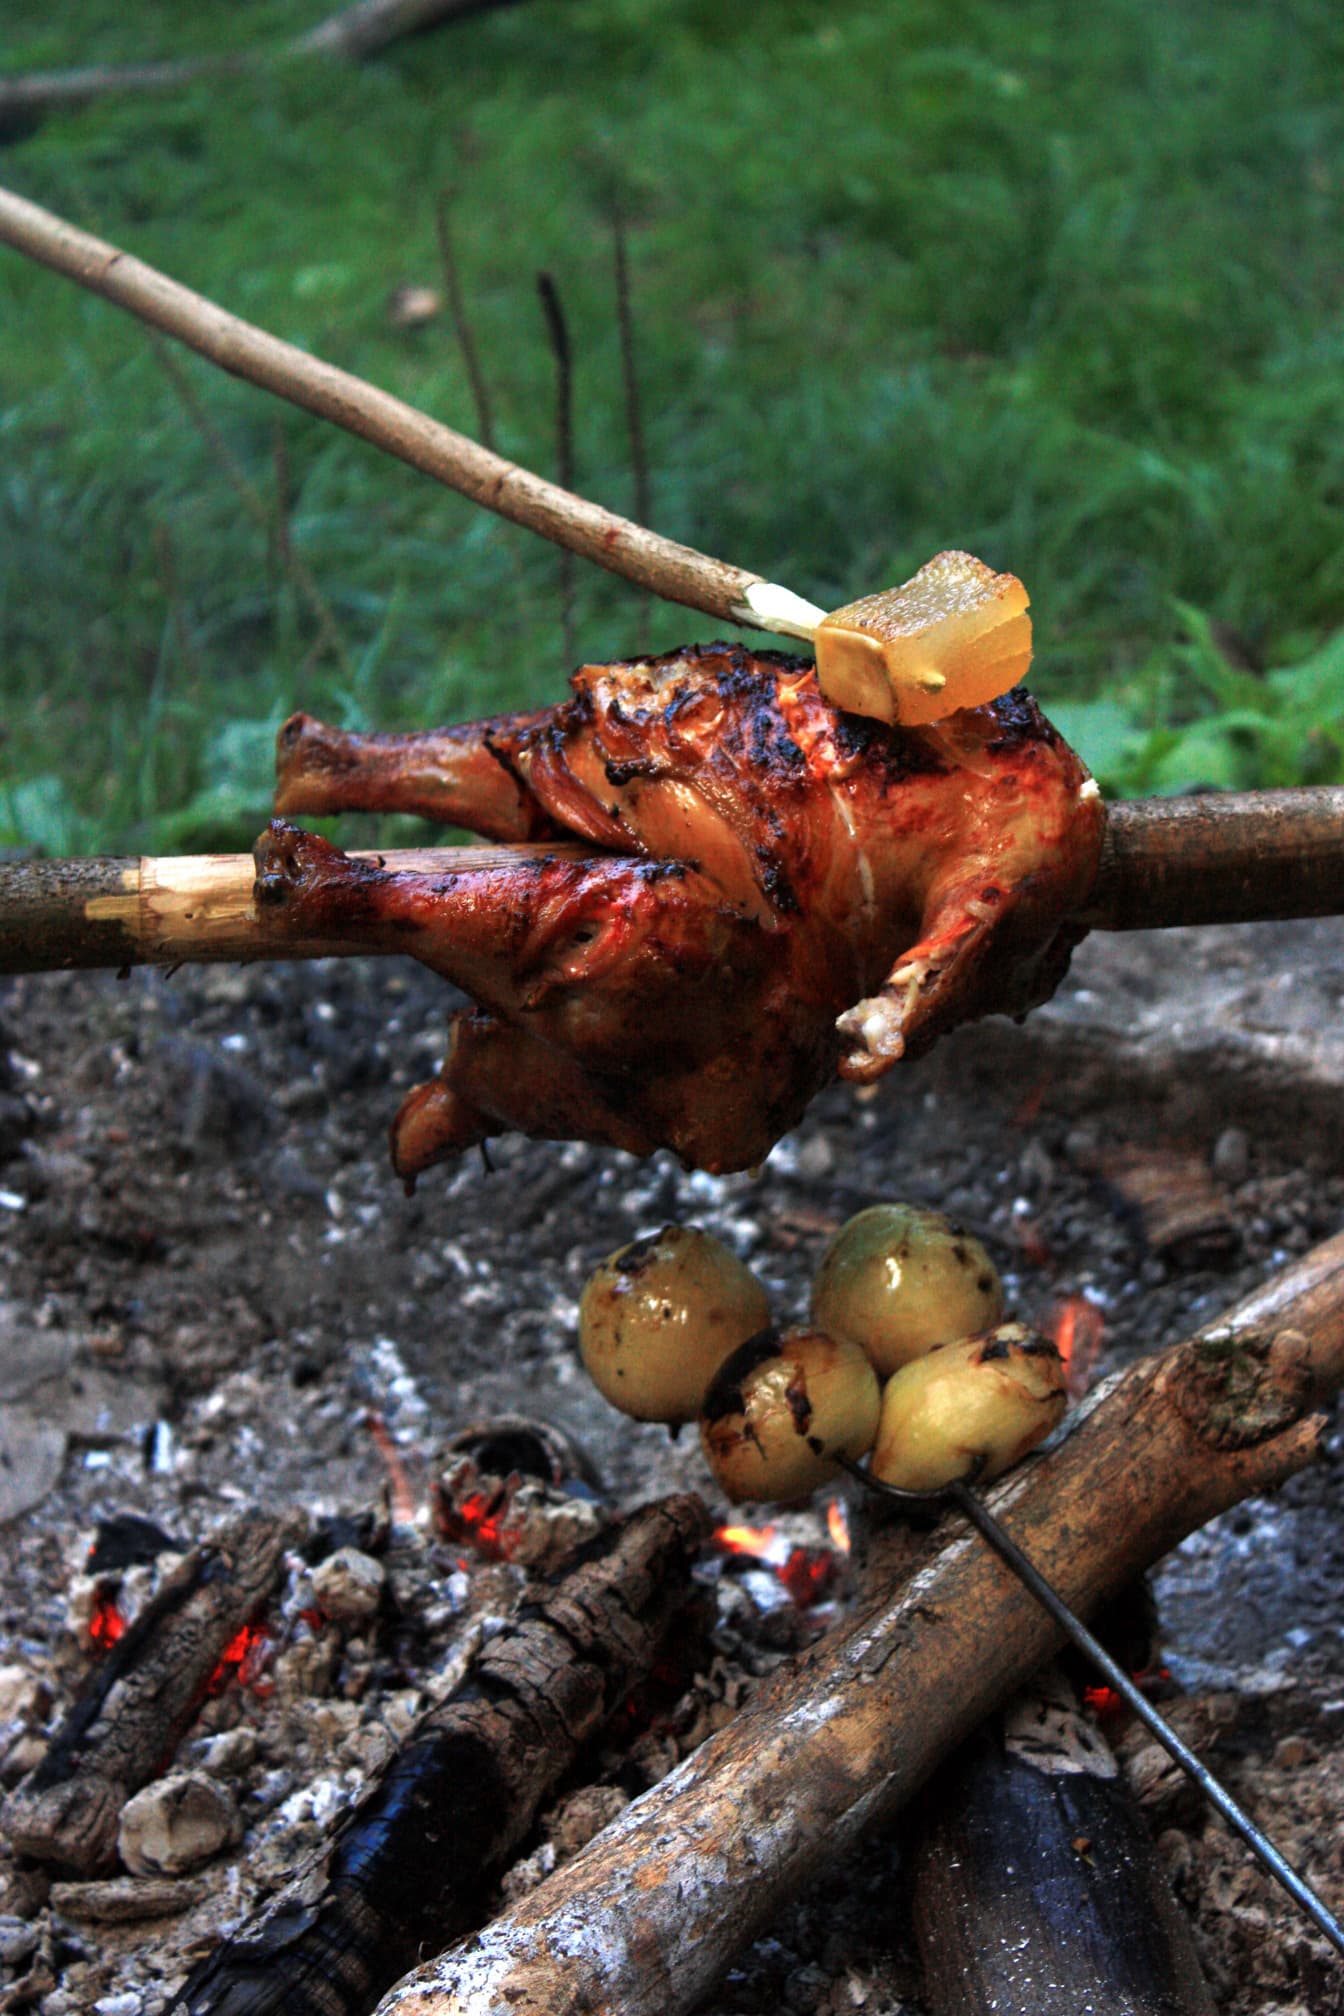 Checken and onion on barbecue on campfire